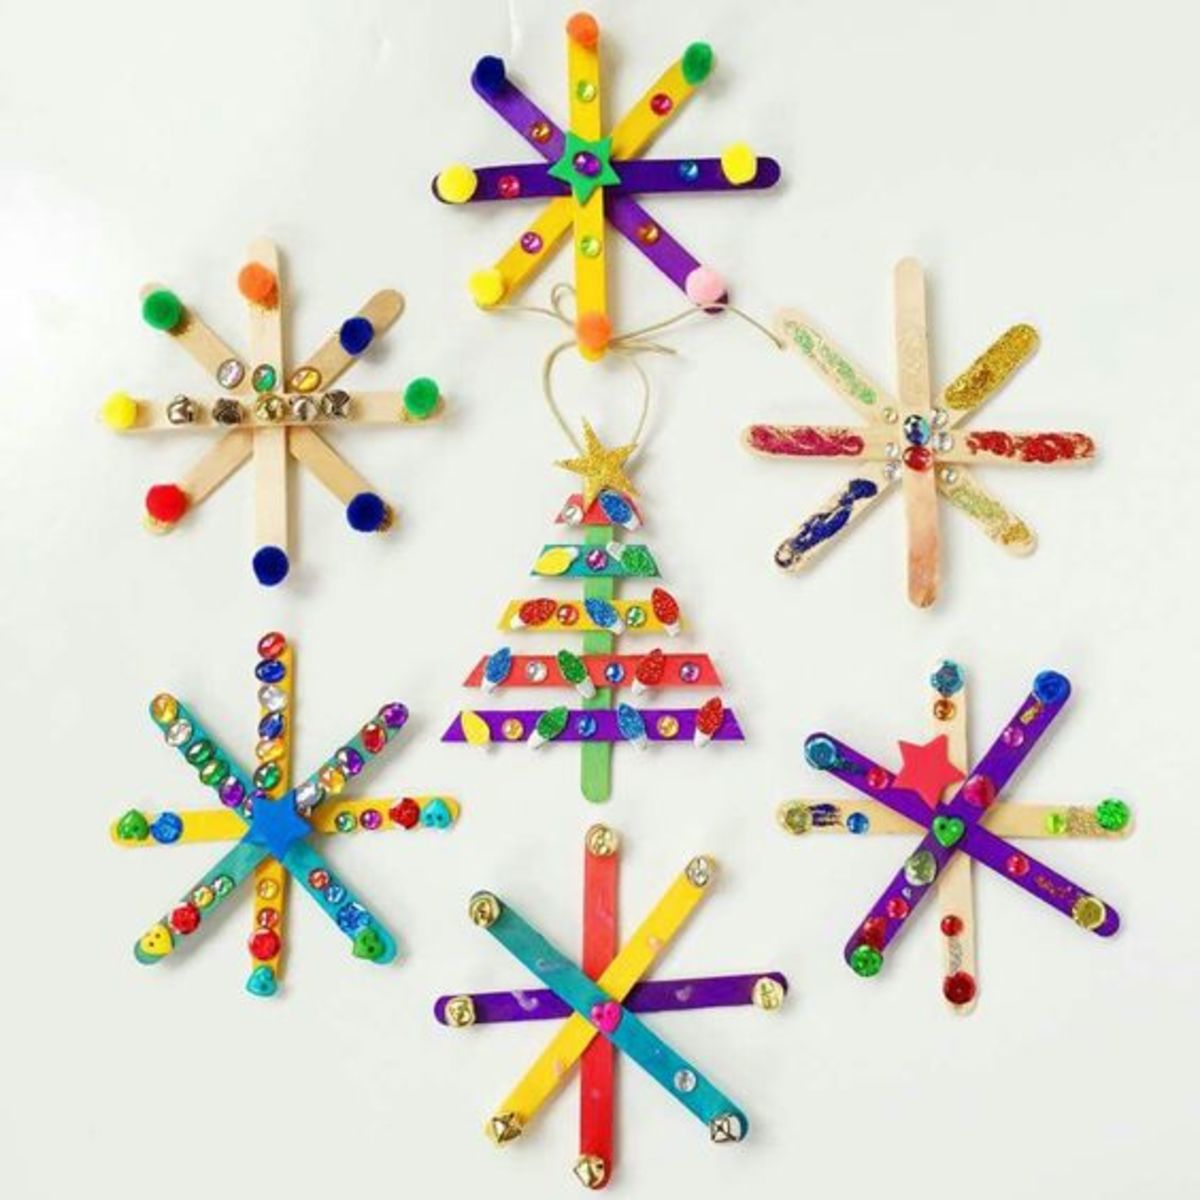 90+ Easy Christmas Crafts Your Kids Will Love to Make - FeltMagnet